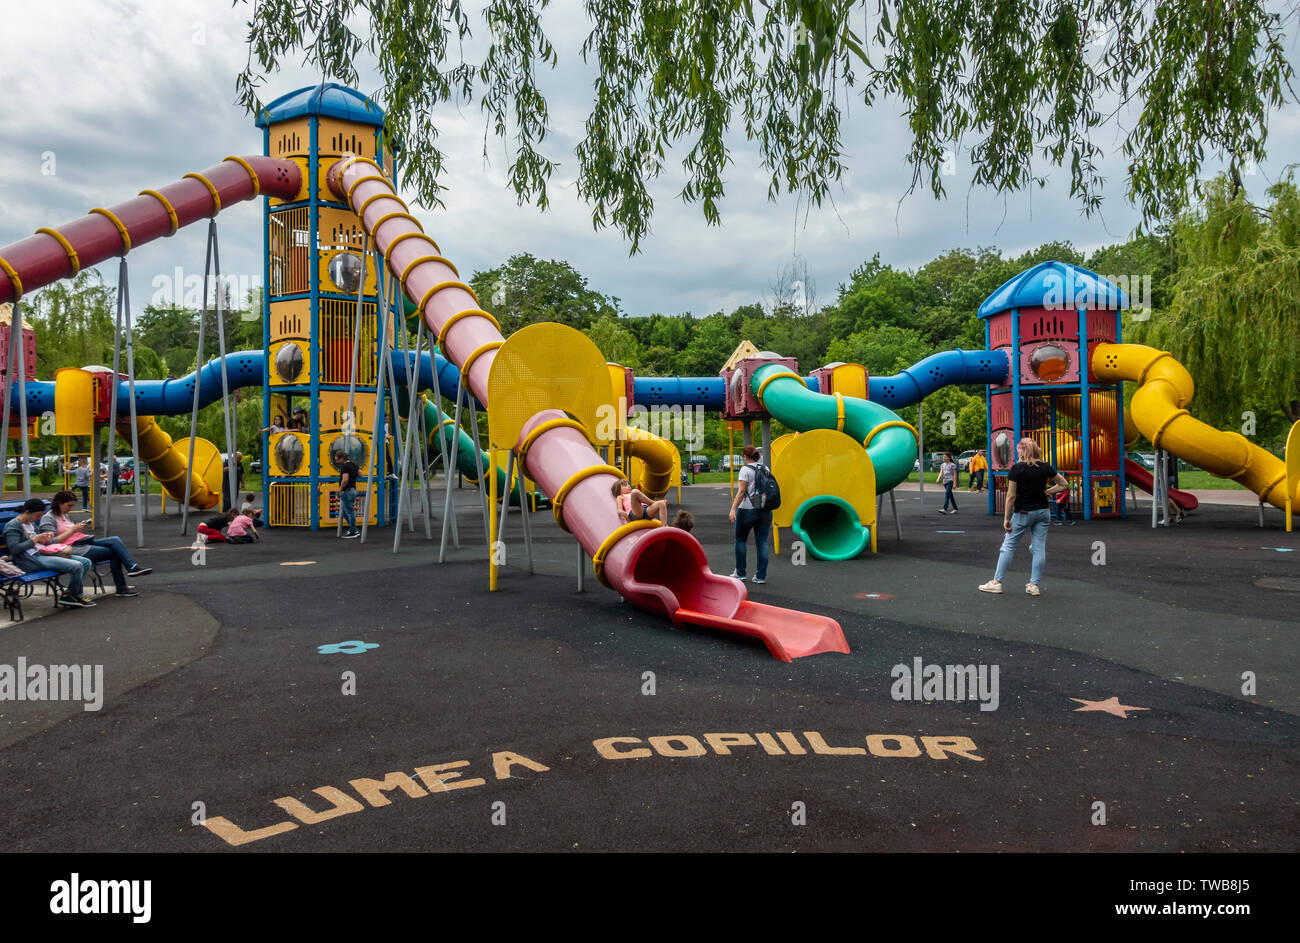 Parents and children relaxing at the slides in a playground areas of Parcul Lumea Copiilor, the Children's World Park in central Bucharest, Romania. Stock Photo